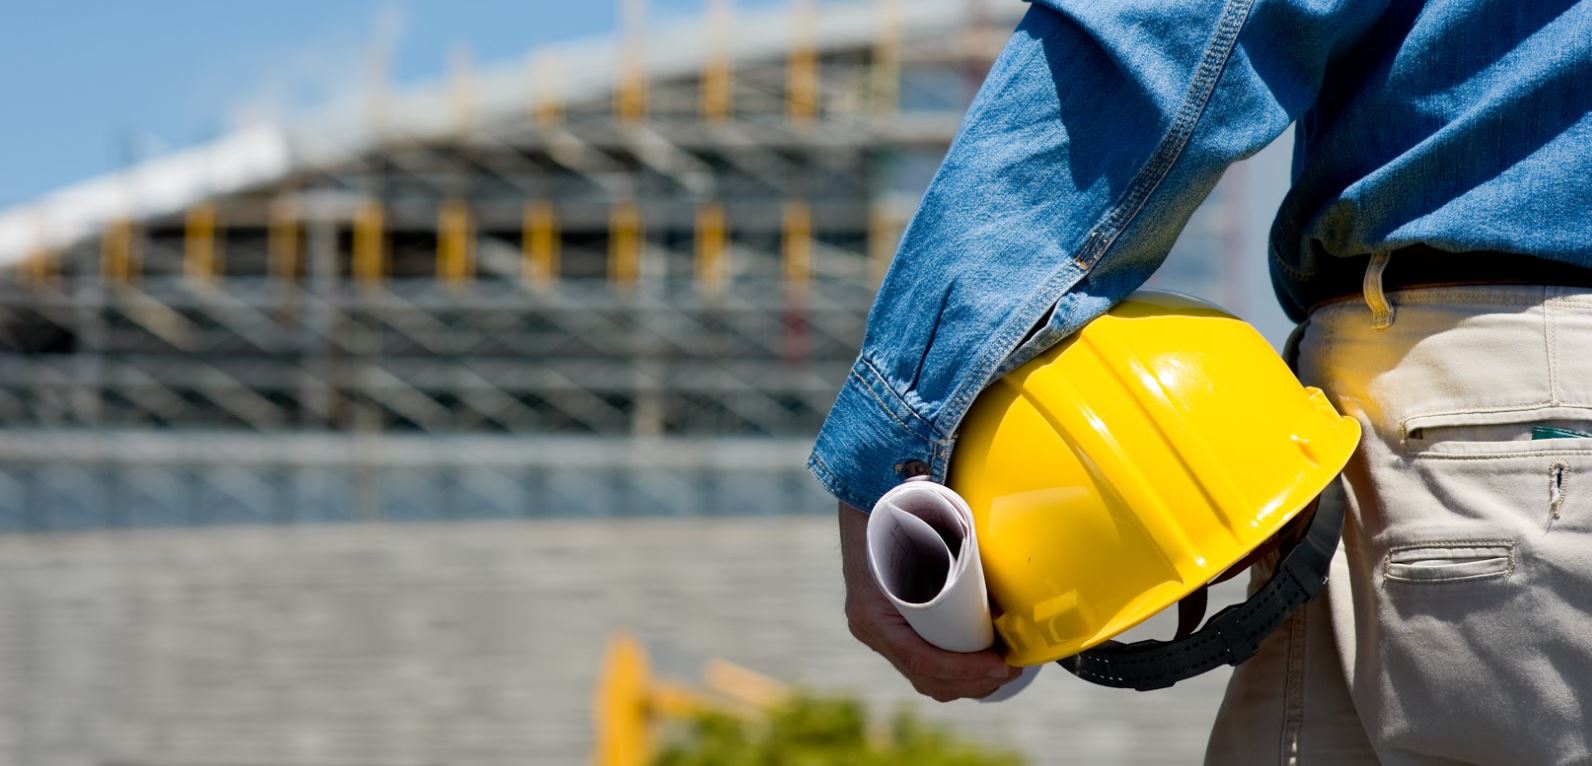 Why are regulations required in the construction industry - 398983449